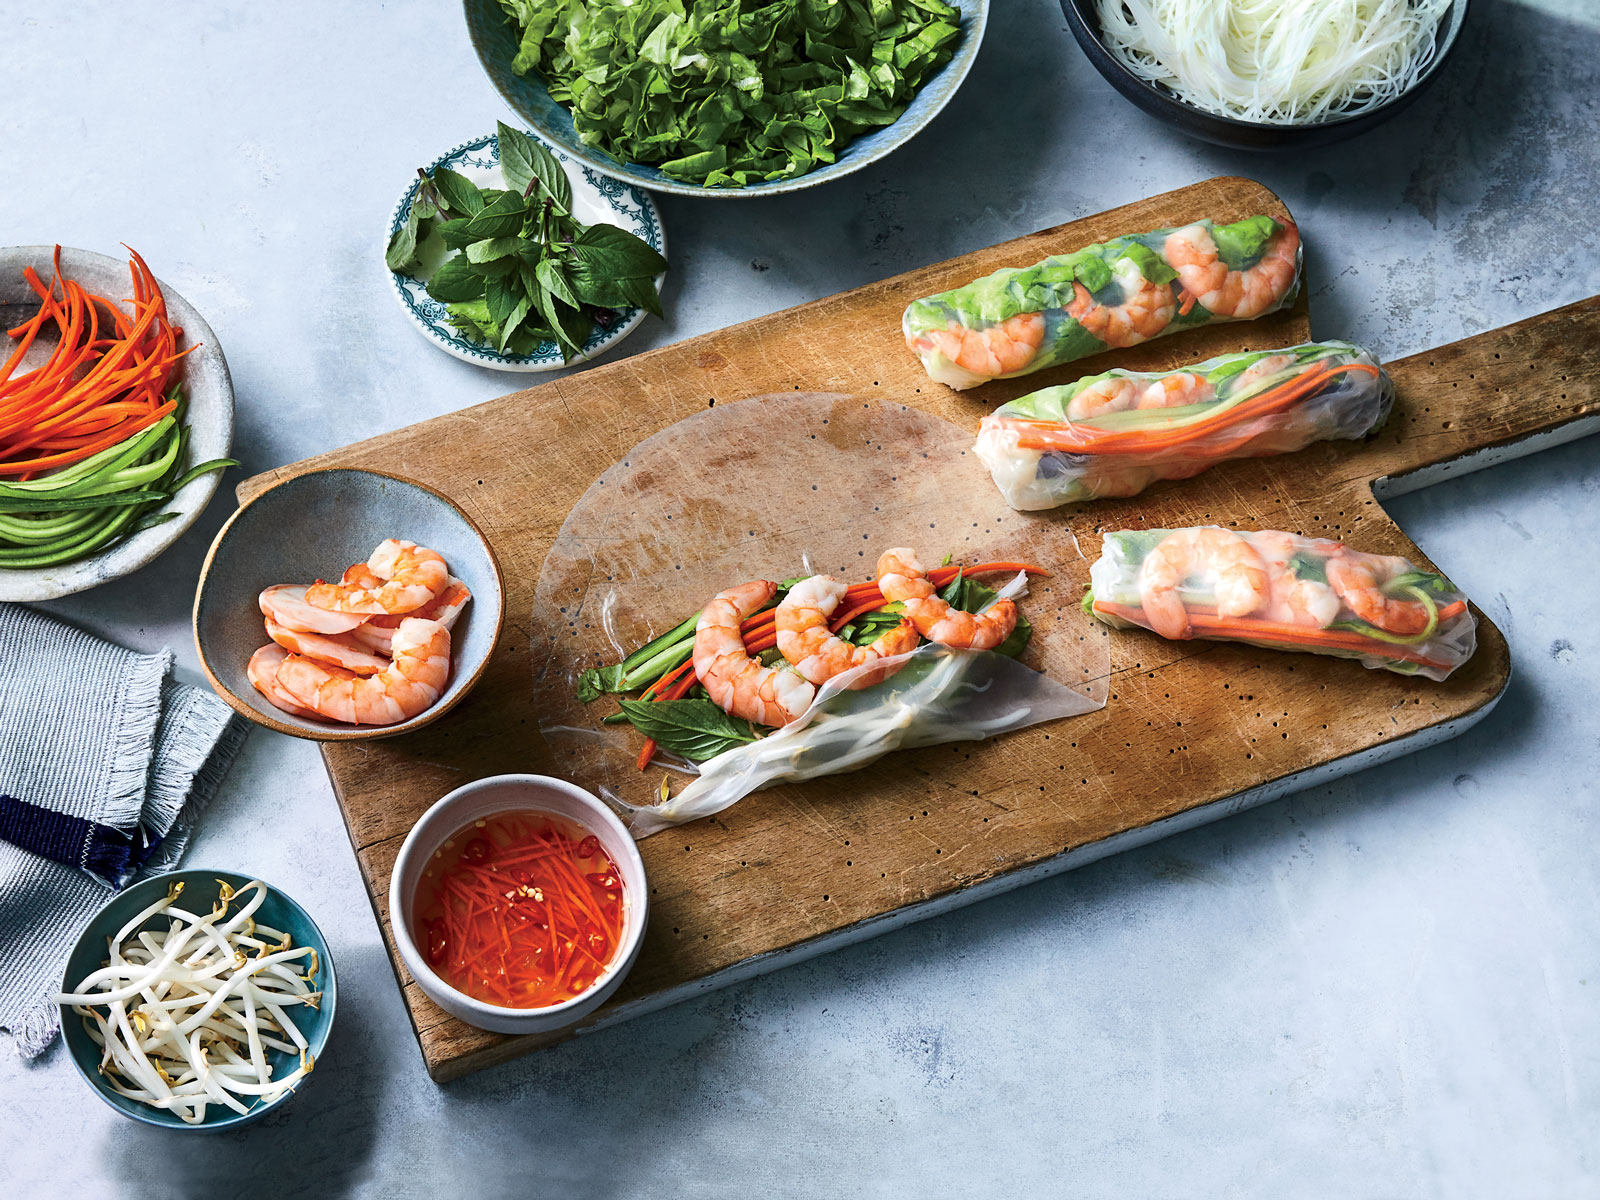 How to Make Perfect Rice Paper Rolls at Home